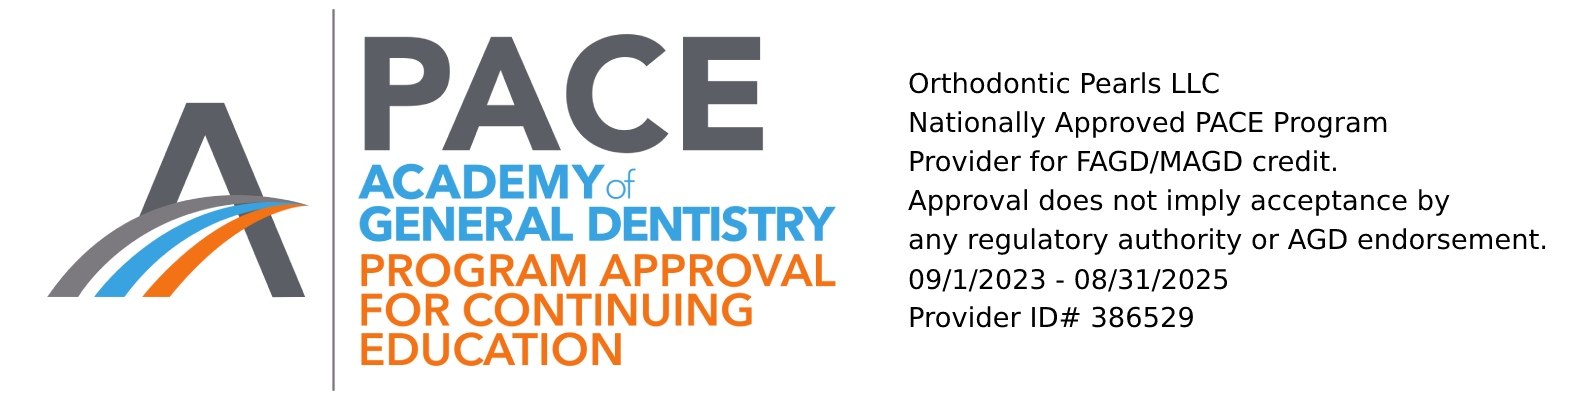 UP TO 14 CE CREDITS ADMINISTERED BY ORTHODONTIC PEARLS